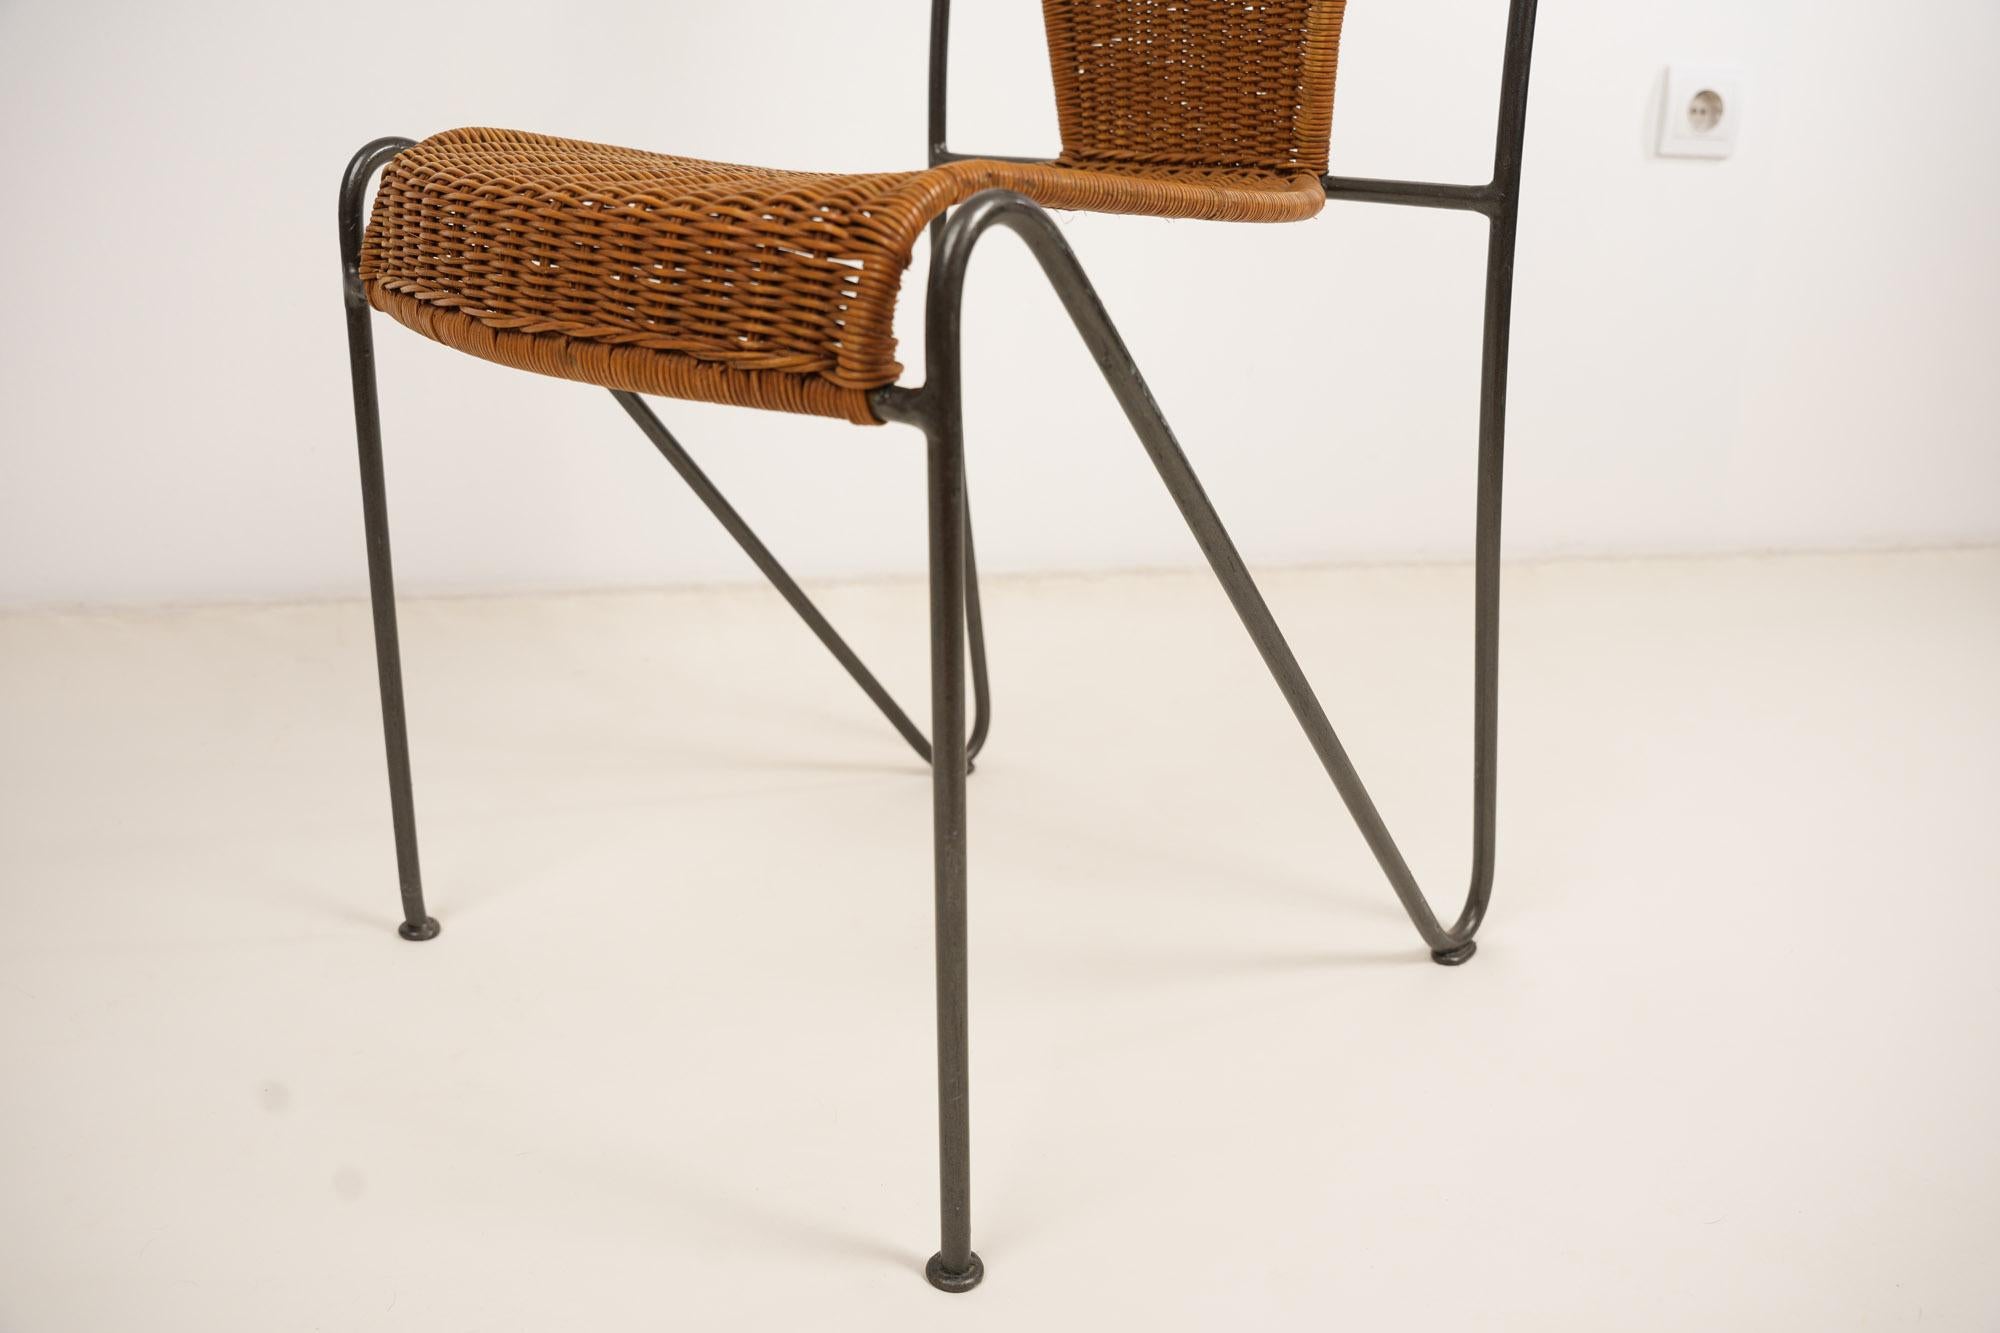 Mid-20th Century Wicker and Iron Chair By Frederic Weinberg 1950s For Sale